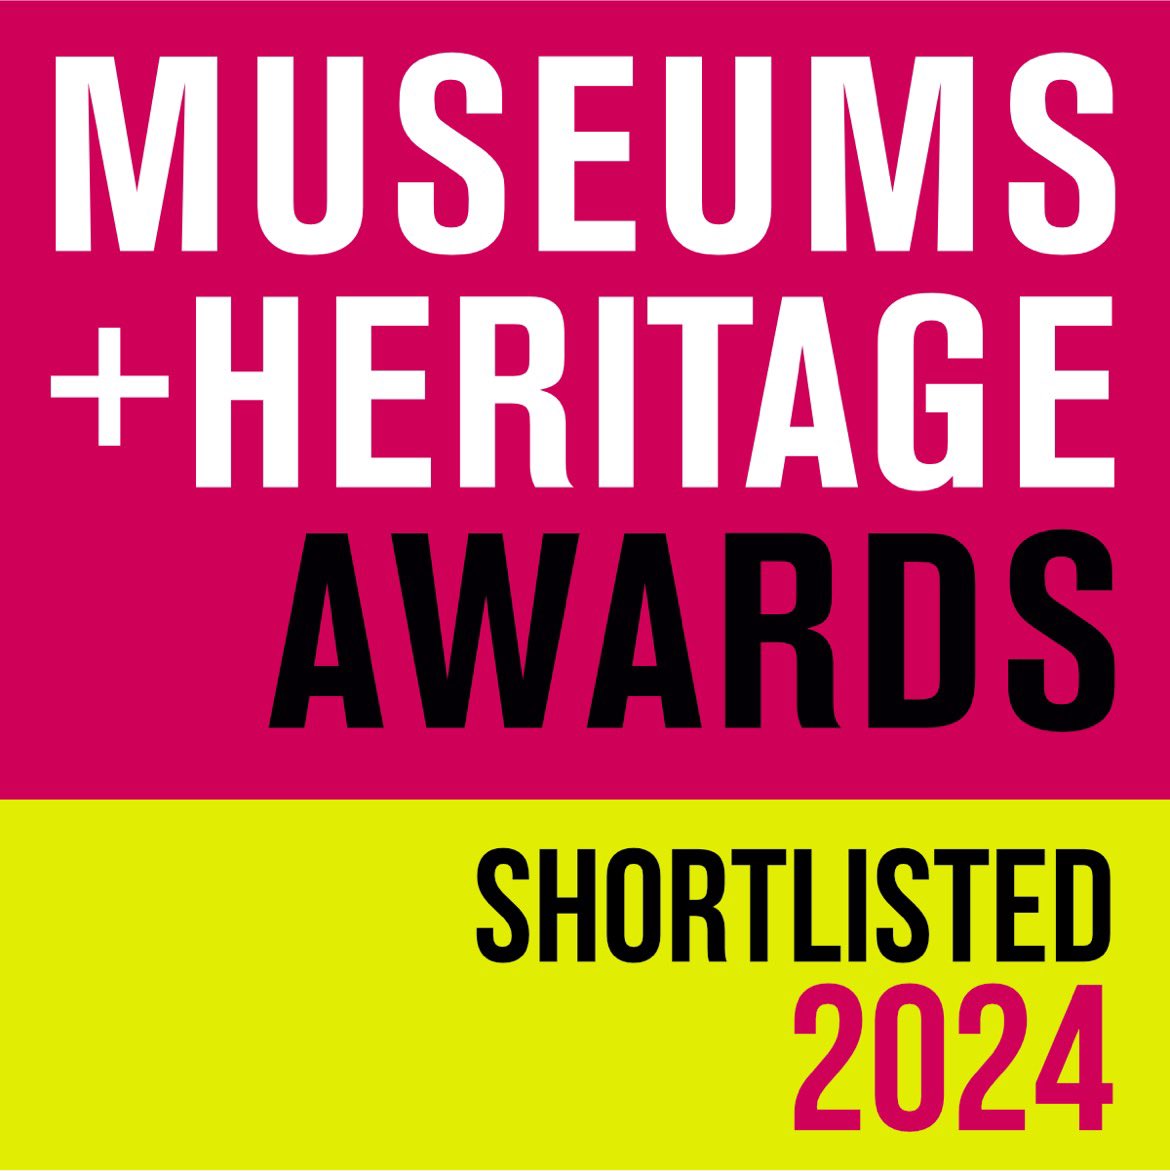 The power of collaboration and co-creation... It shines through our four shortlistings in the Museums + Heritage Awards. Thank you South Asia Collective, @britishmuseum, Team Joe, @pinccollege, Museum Development North West and @Carbon_Literacy - you bring out the best in us!